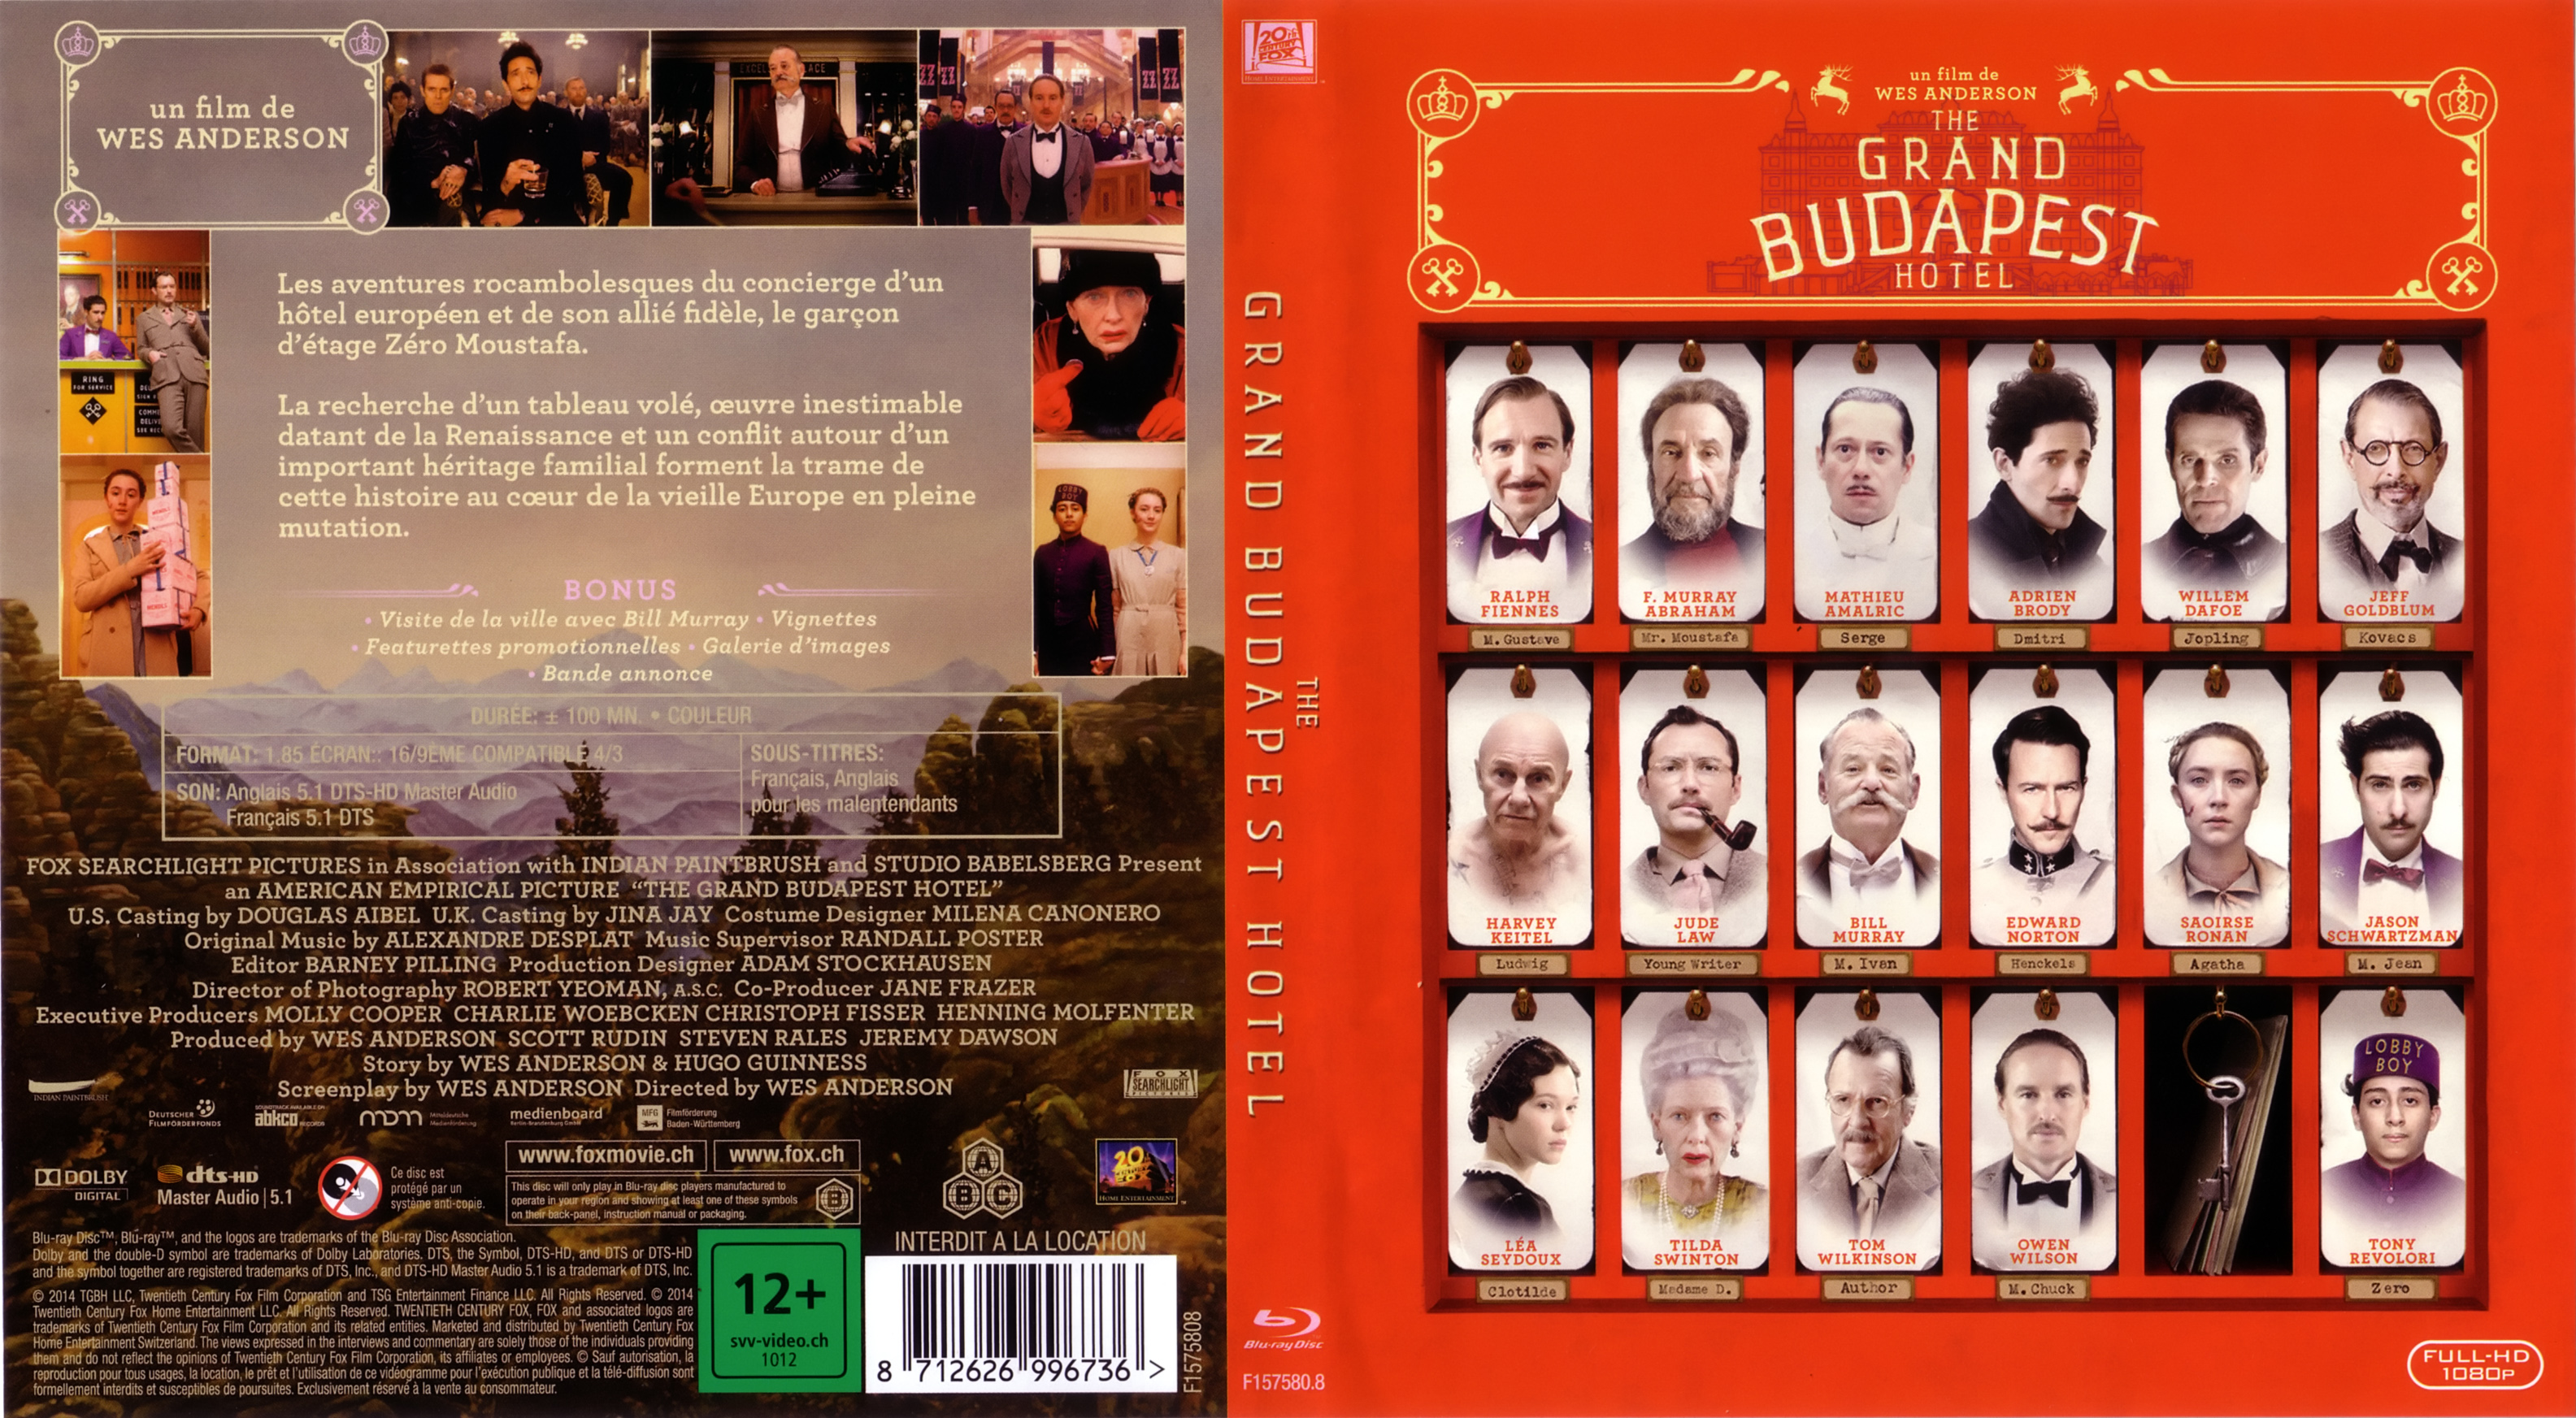 Jaquette DVD The Grand Budapest Hotel (BLU-RAY) v2